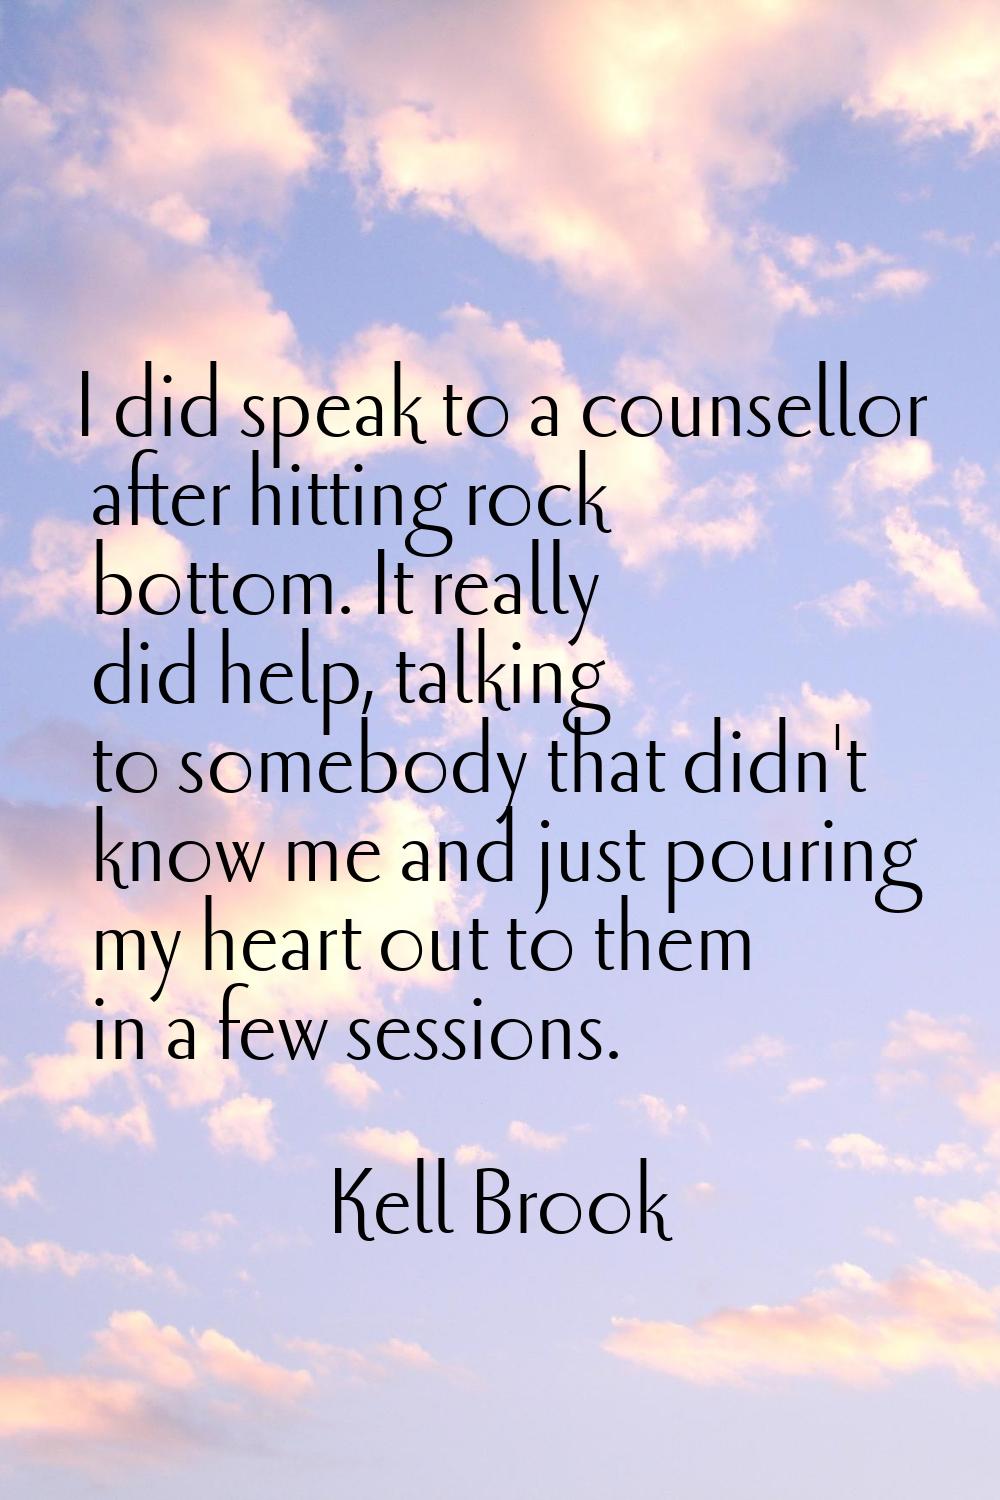 I did speak to a counsellor after hitting rock bottom. It really did help, talking to somebody that